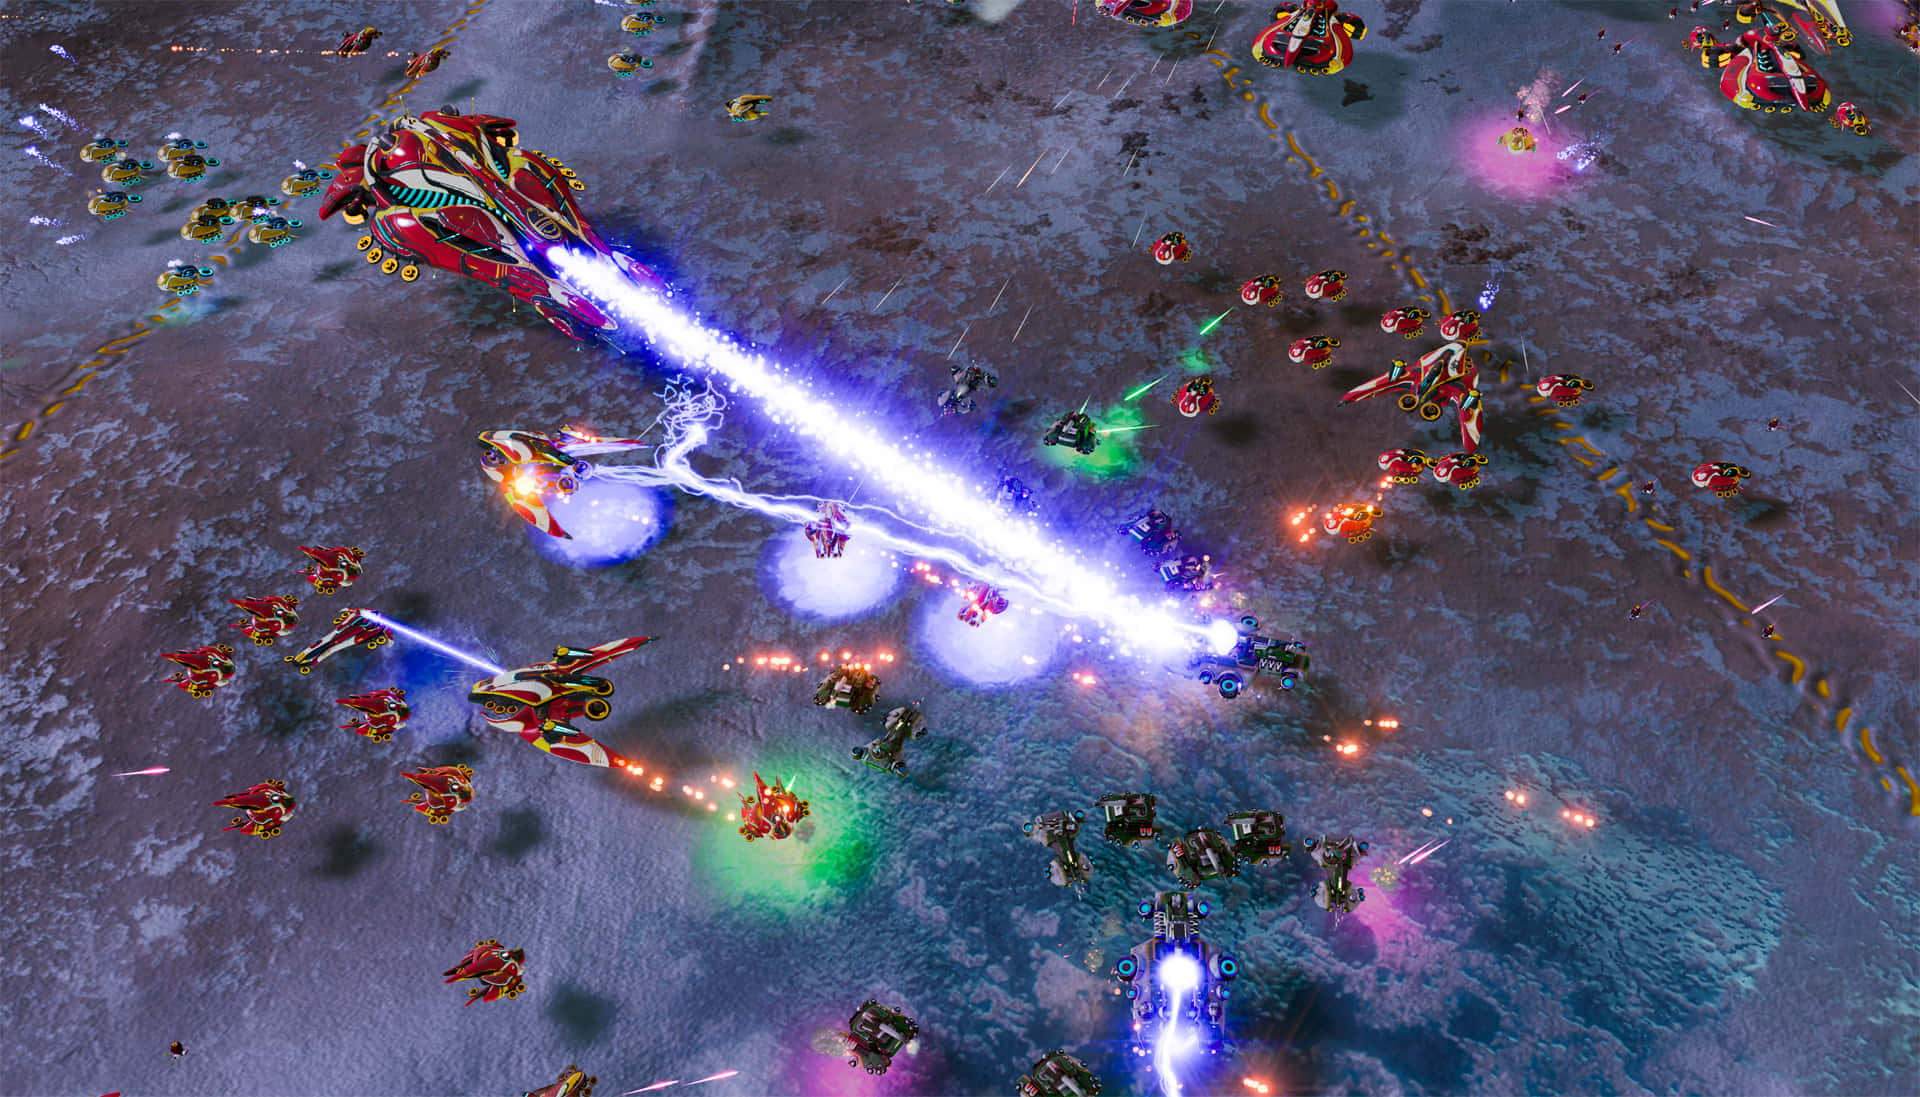 Wage War Across the Galaxy - Ashes of the Singularity Escalation